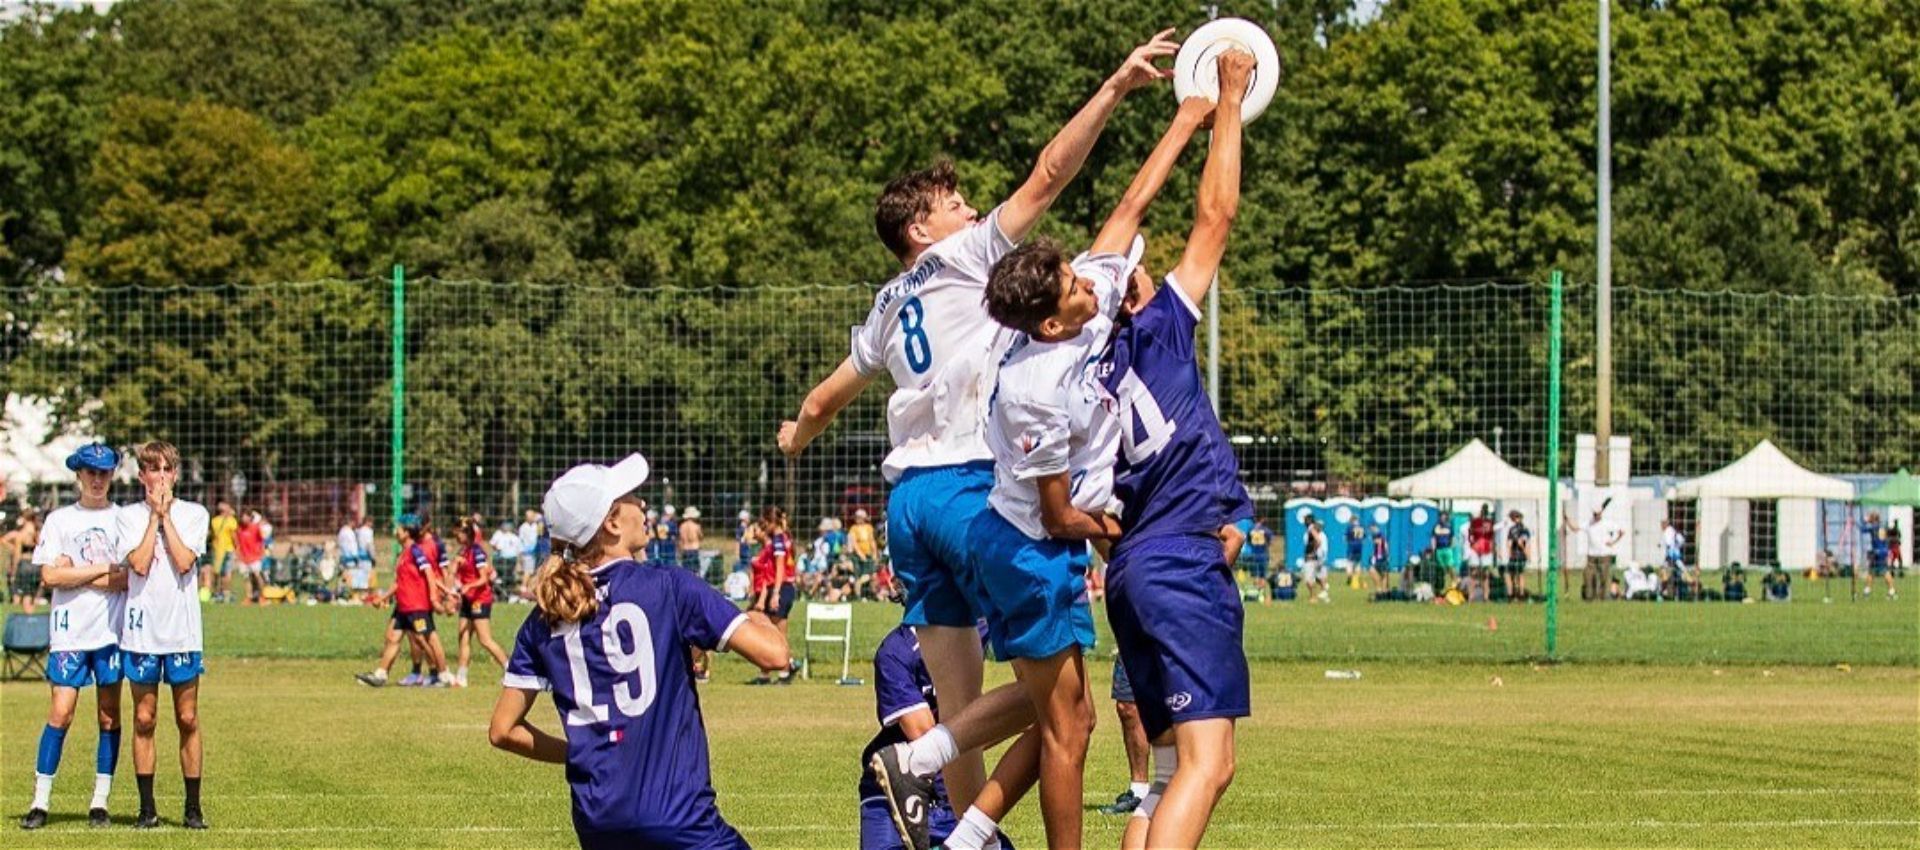 Year 11 Student Represents UK in Ultimate Frisbee